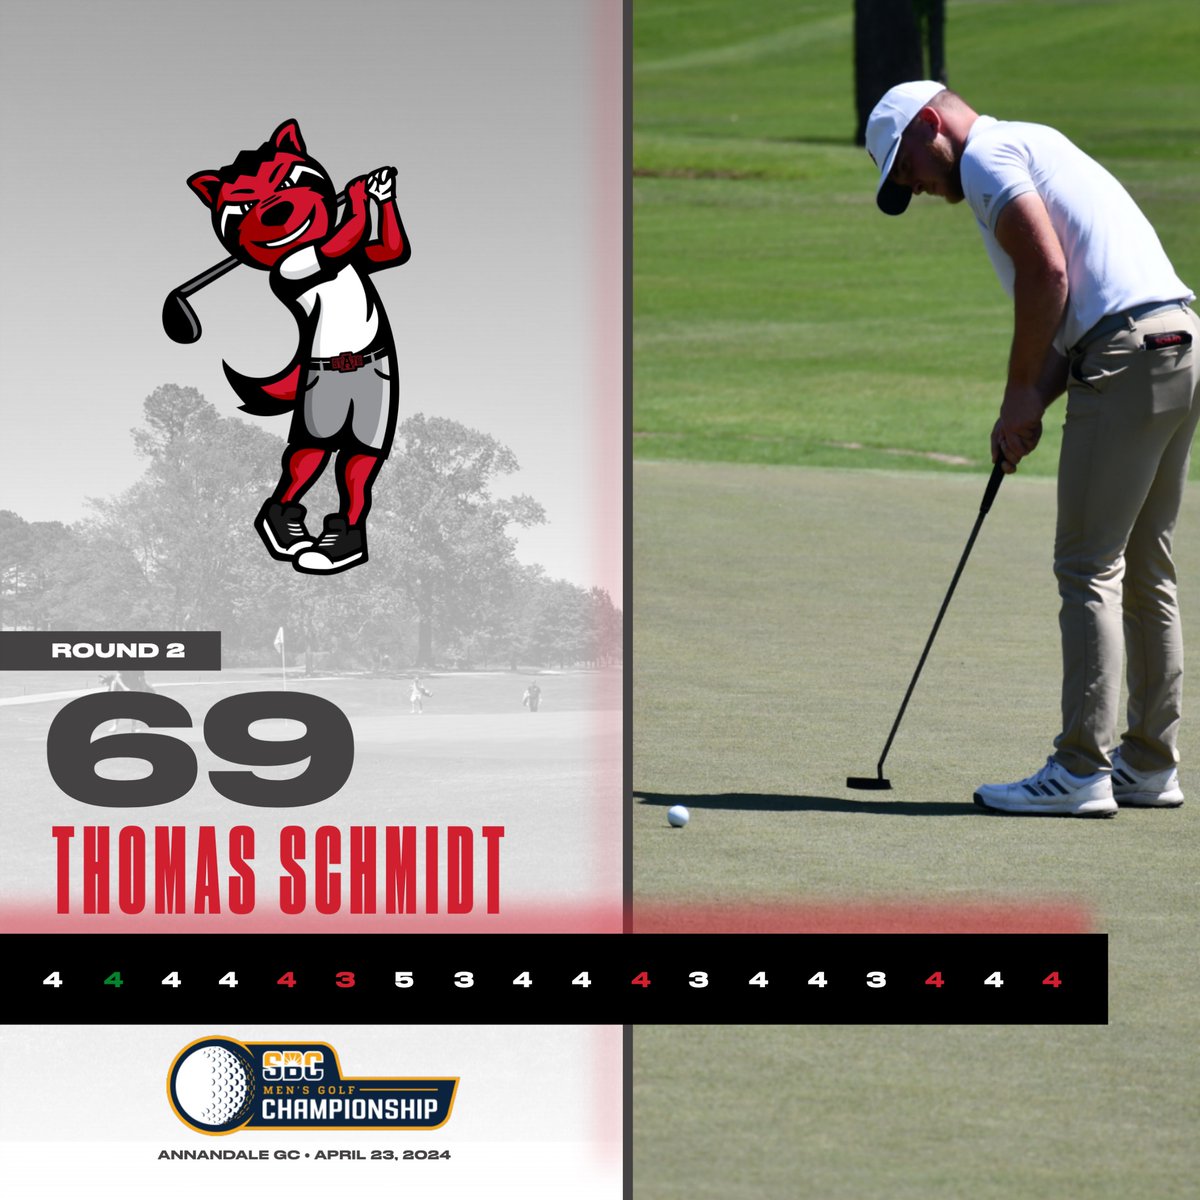 Red Wolves shoot 7-under par 281 in second round to build big lead entering final round of stroke play Wednesday @SunBelt Championship. Schmidt (1st), Pappas (T2nd) and Lile (T2nd) among top four individuals #WolvesUp